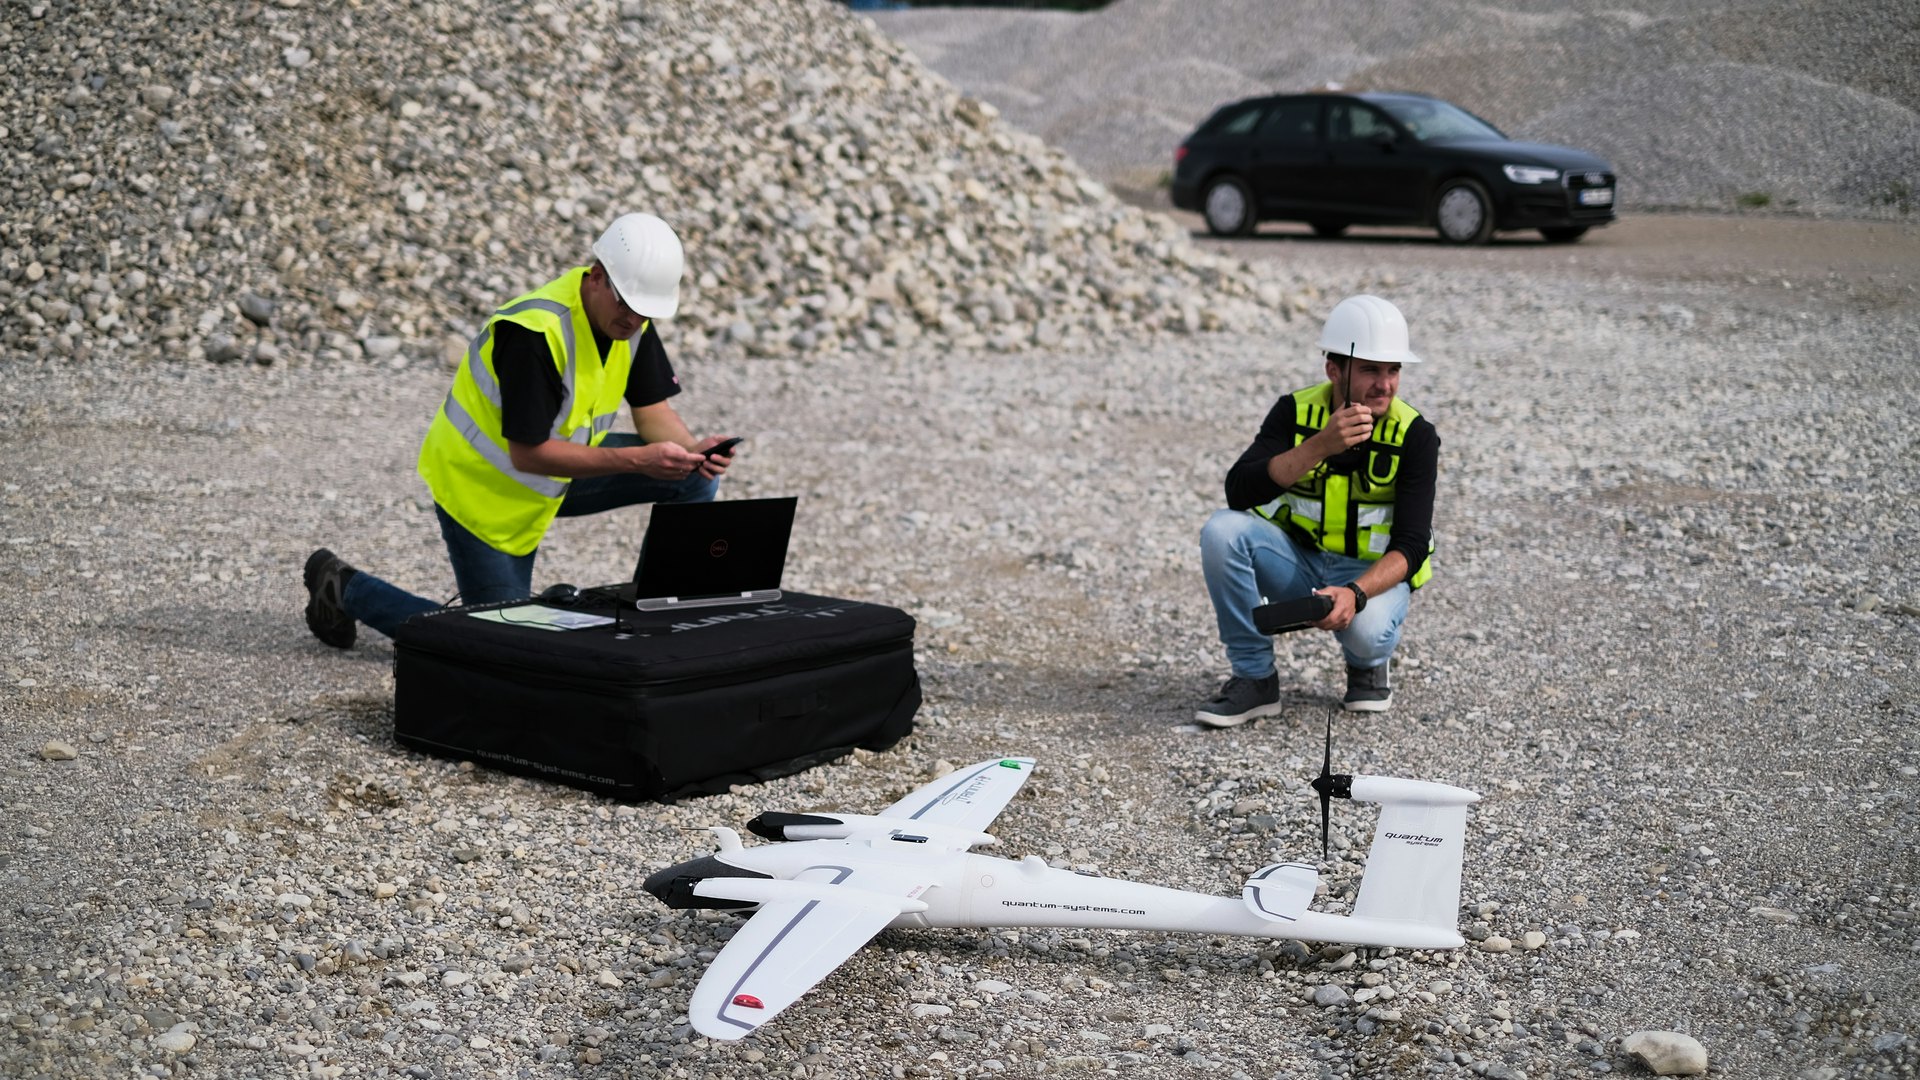 Quantum-Systems and Propeller Aero Partner to Improve Survey Accuracy,  Reduce Data Collection Time, and Easily Share Digital Models Between Teams